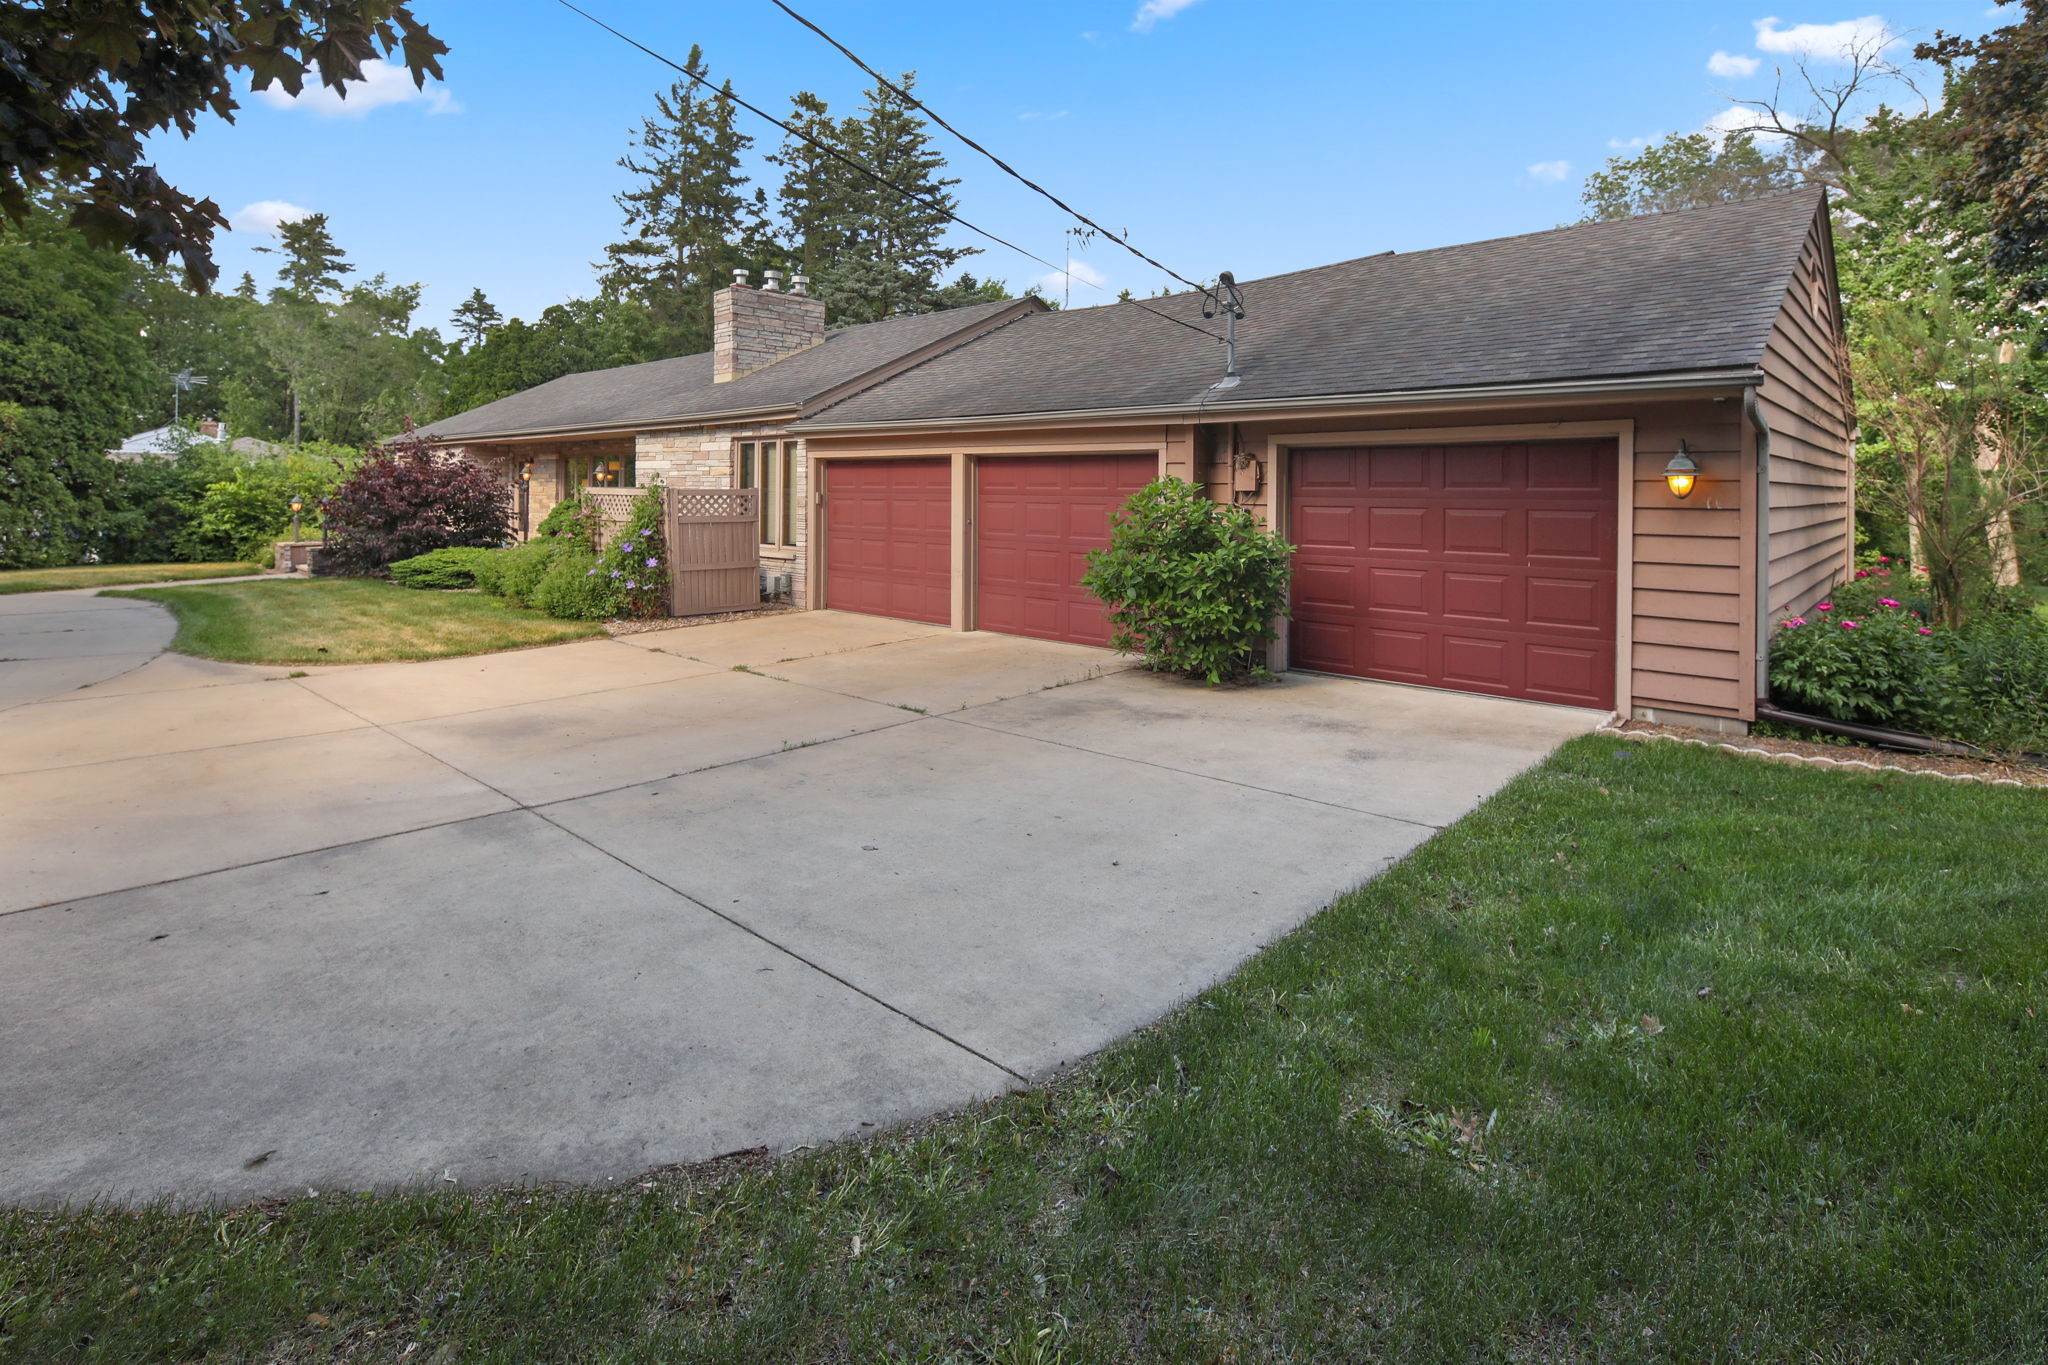  1310 Cooper Ave S, St. Cloud, MN 56301, US Photo 2